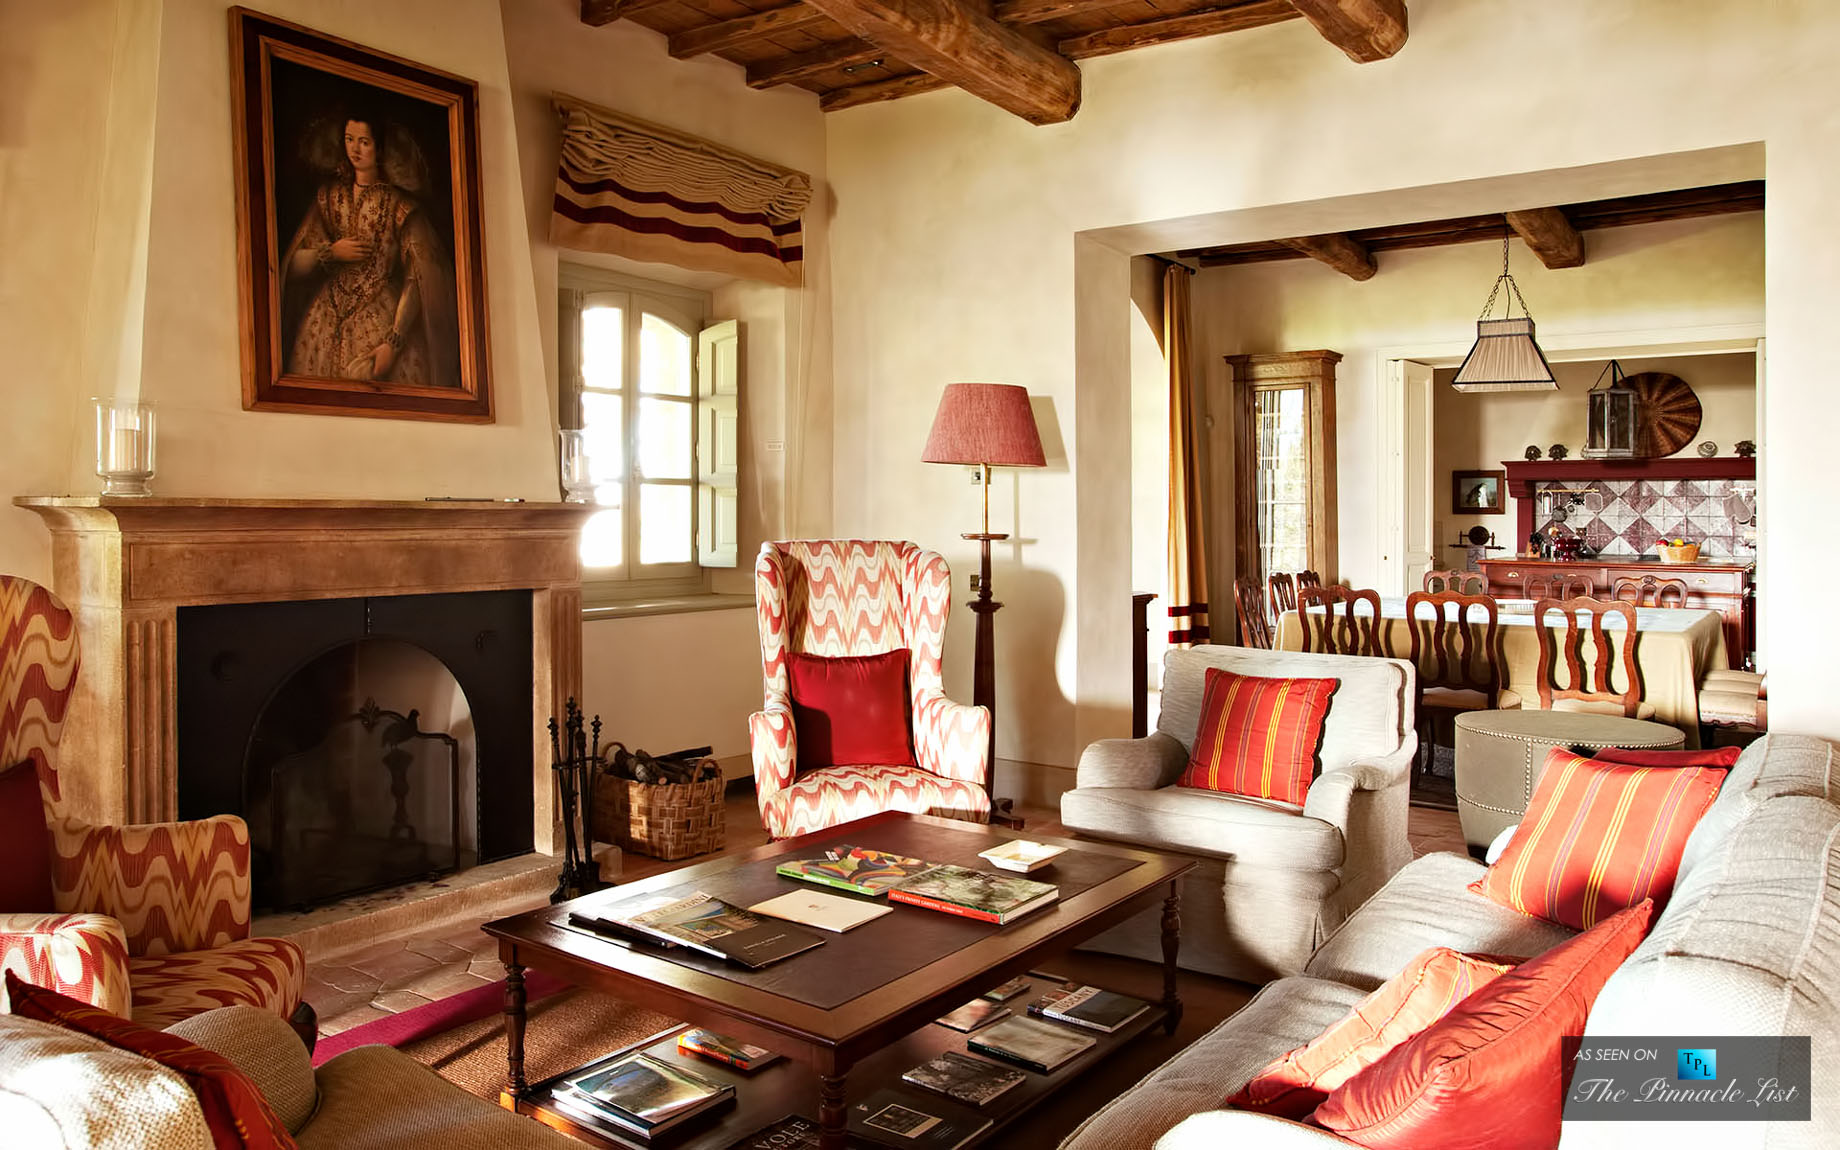 Casa Biondi - Tuscany, Italy - The 5 Best Rural Villas in the Mediterranean for Luxury Retreats